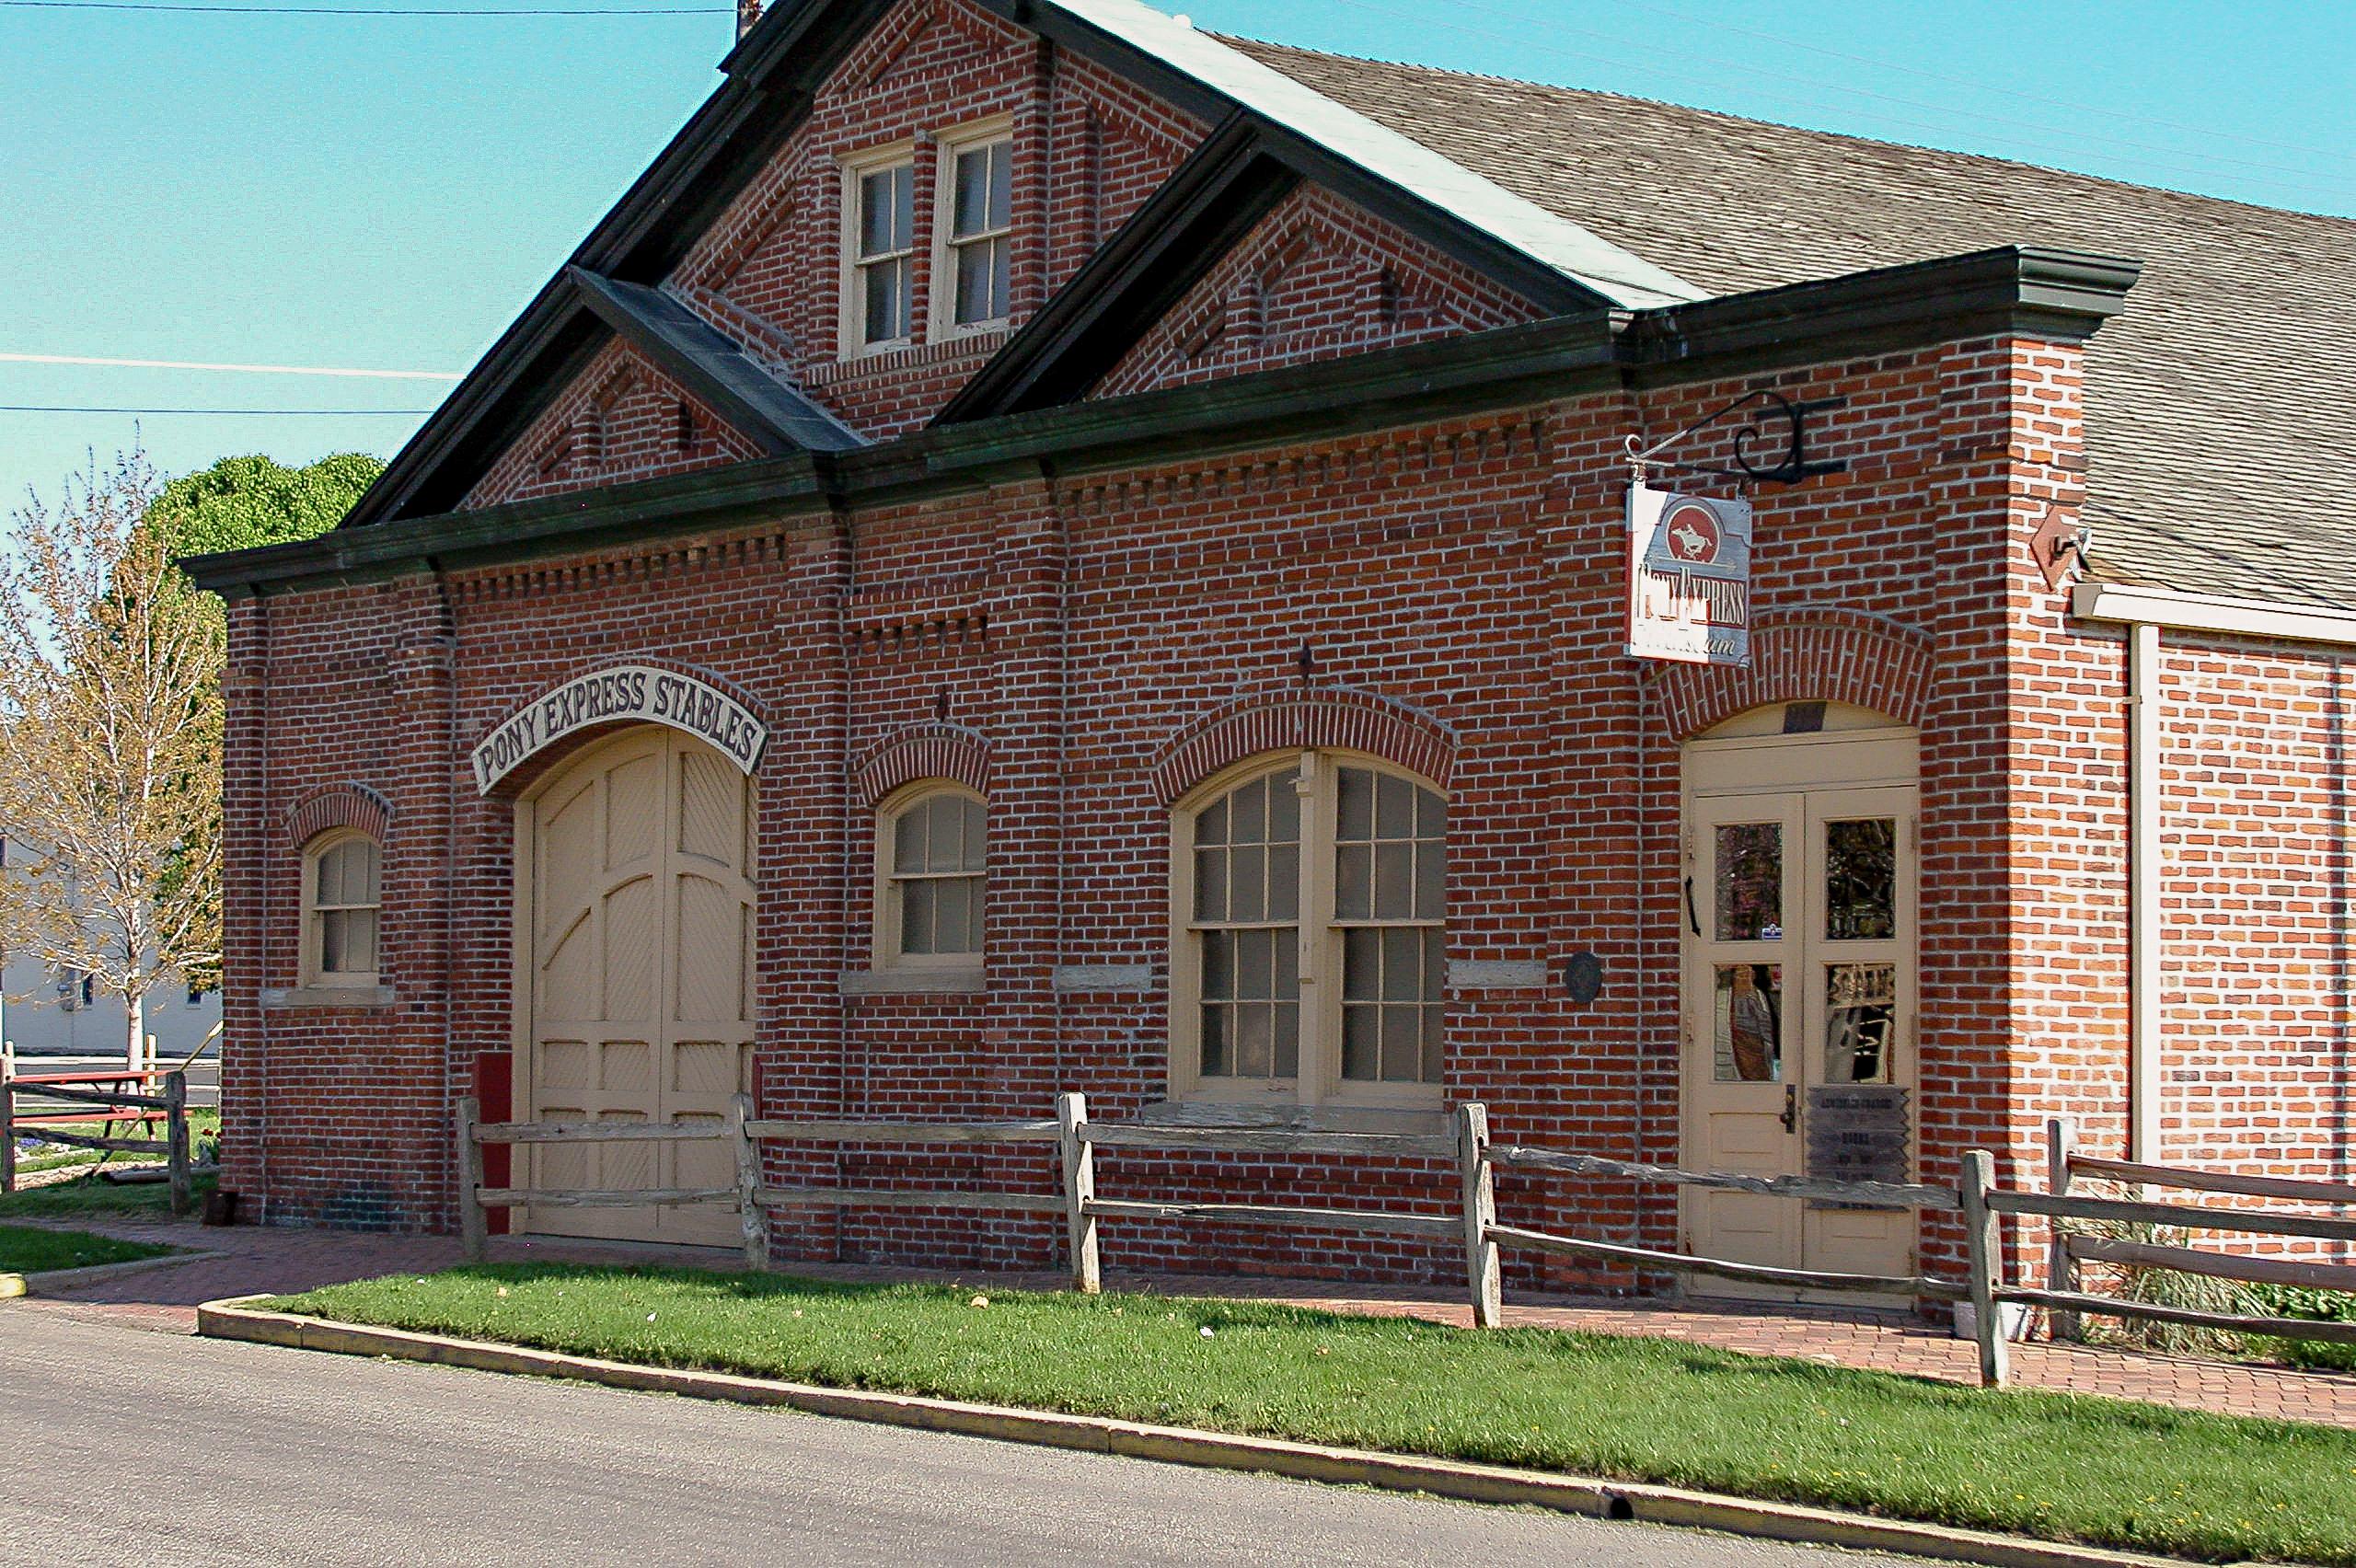 A large brick historic stable.